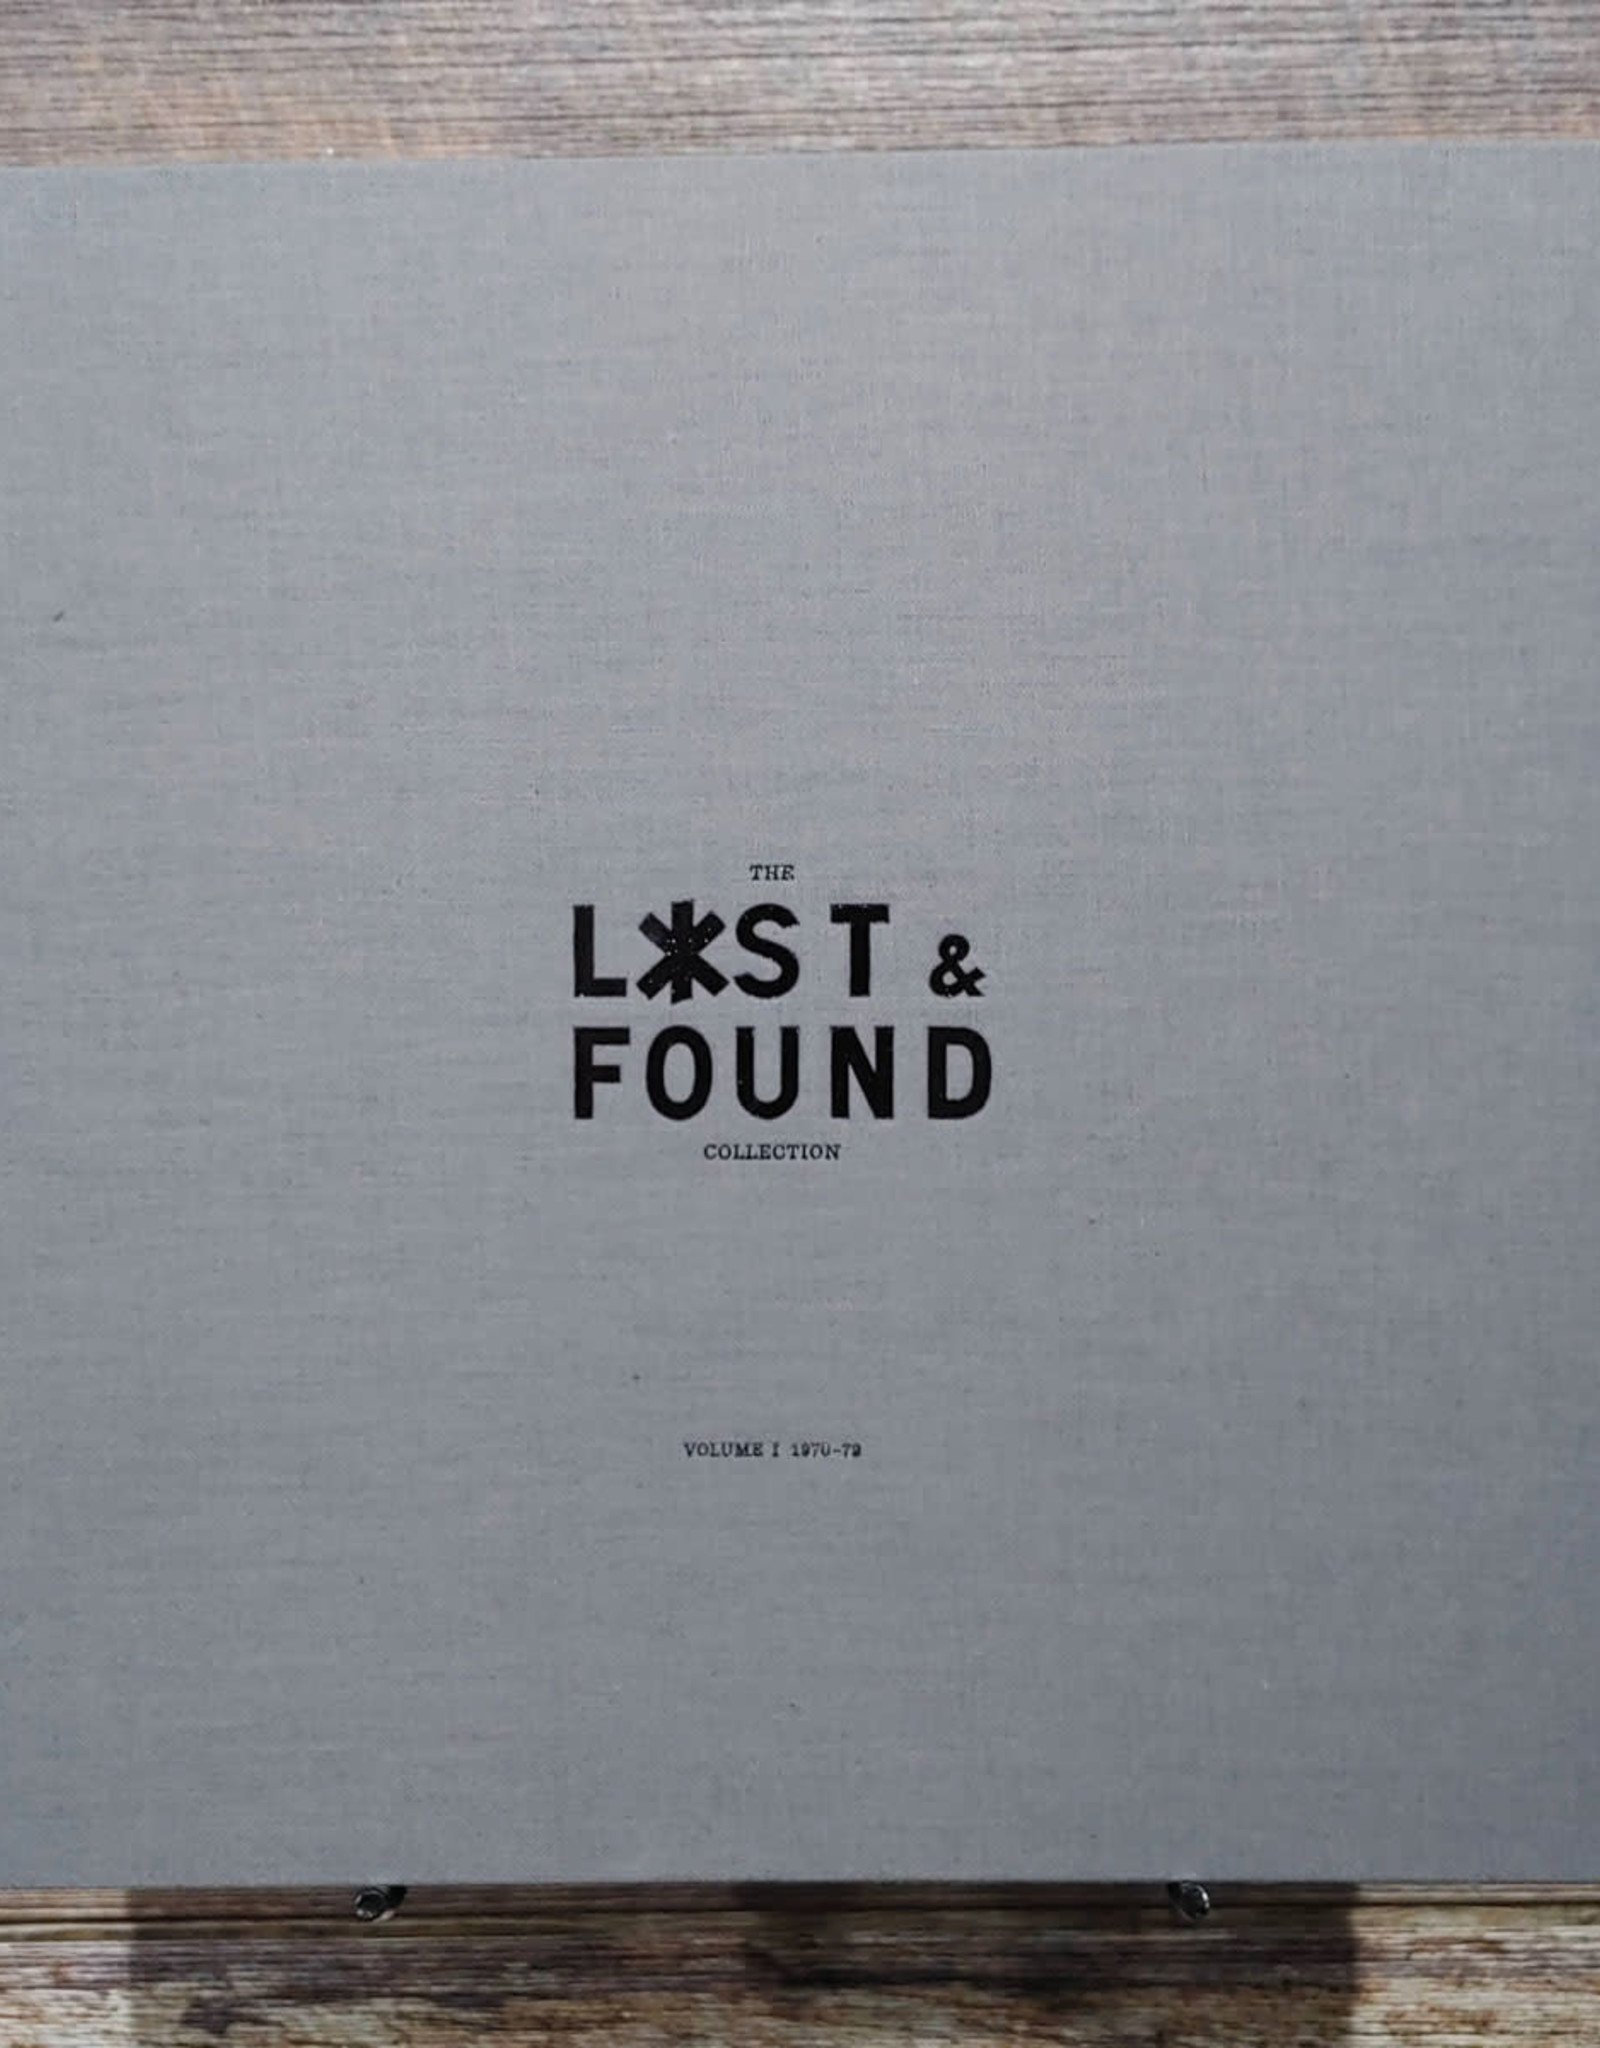 Global Surf Network The Lost & Found Collection Gallery Book Volume I 1970-79